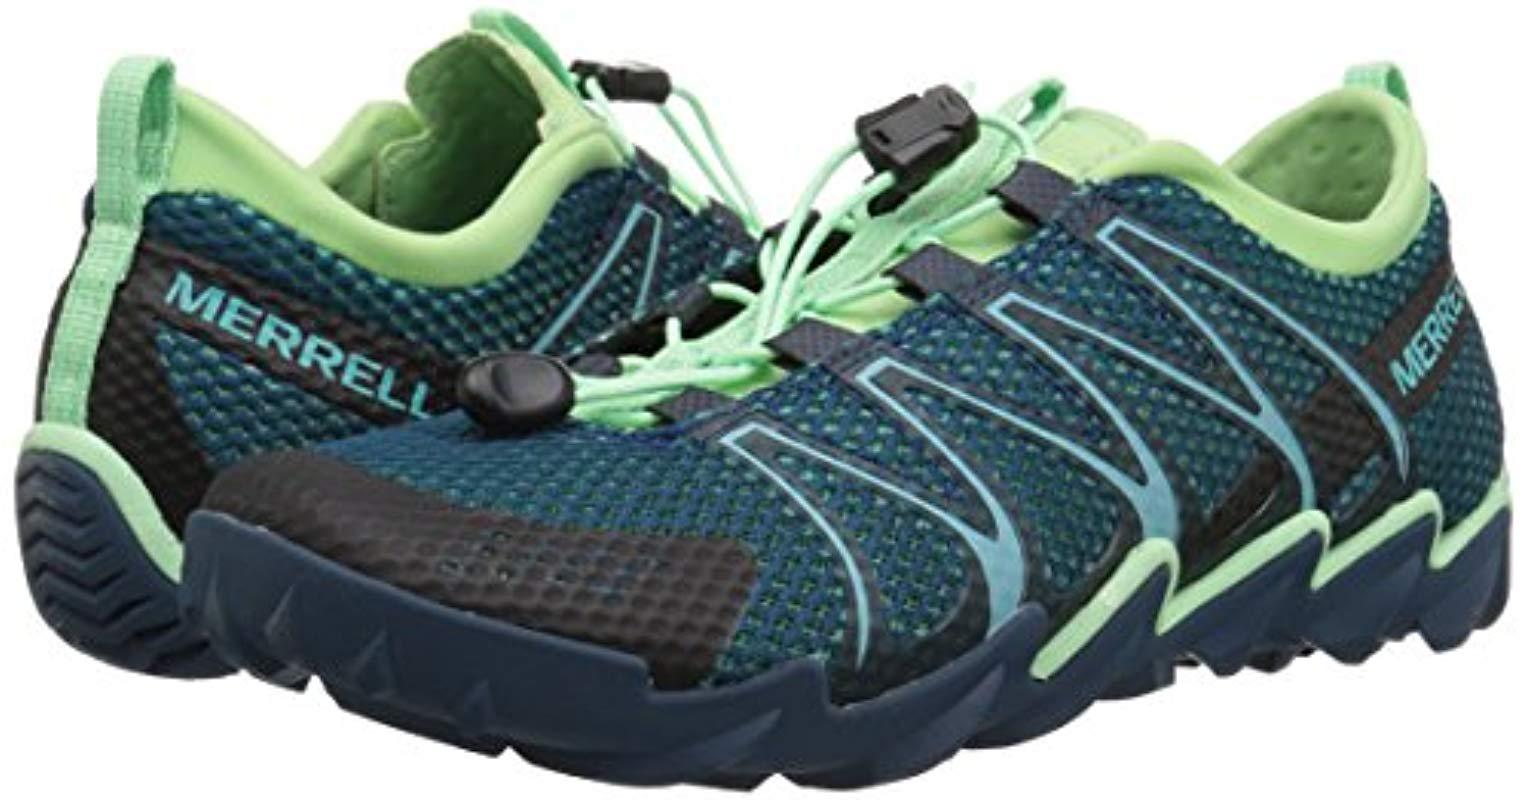 merrell water shoes